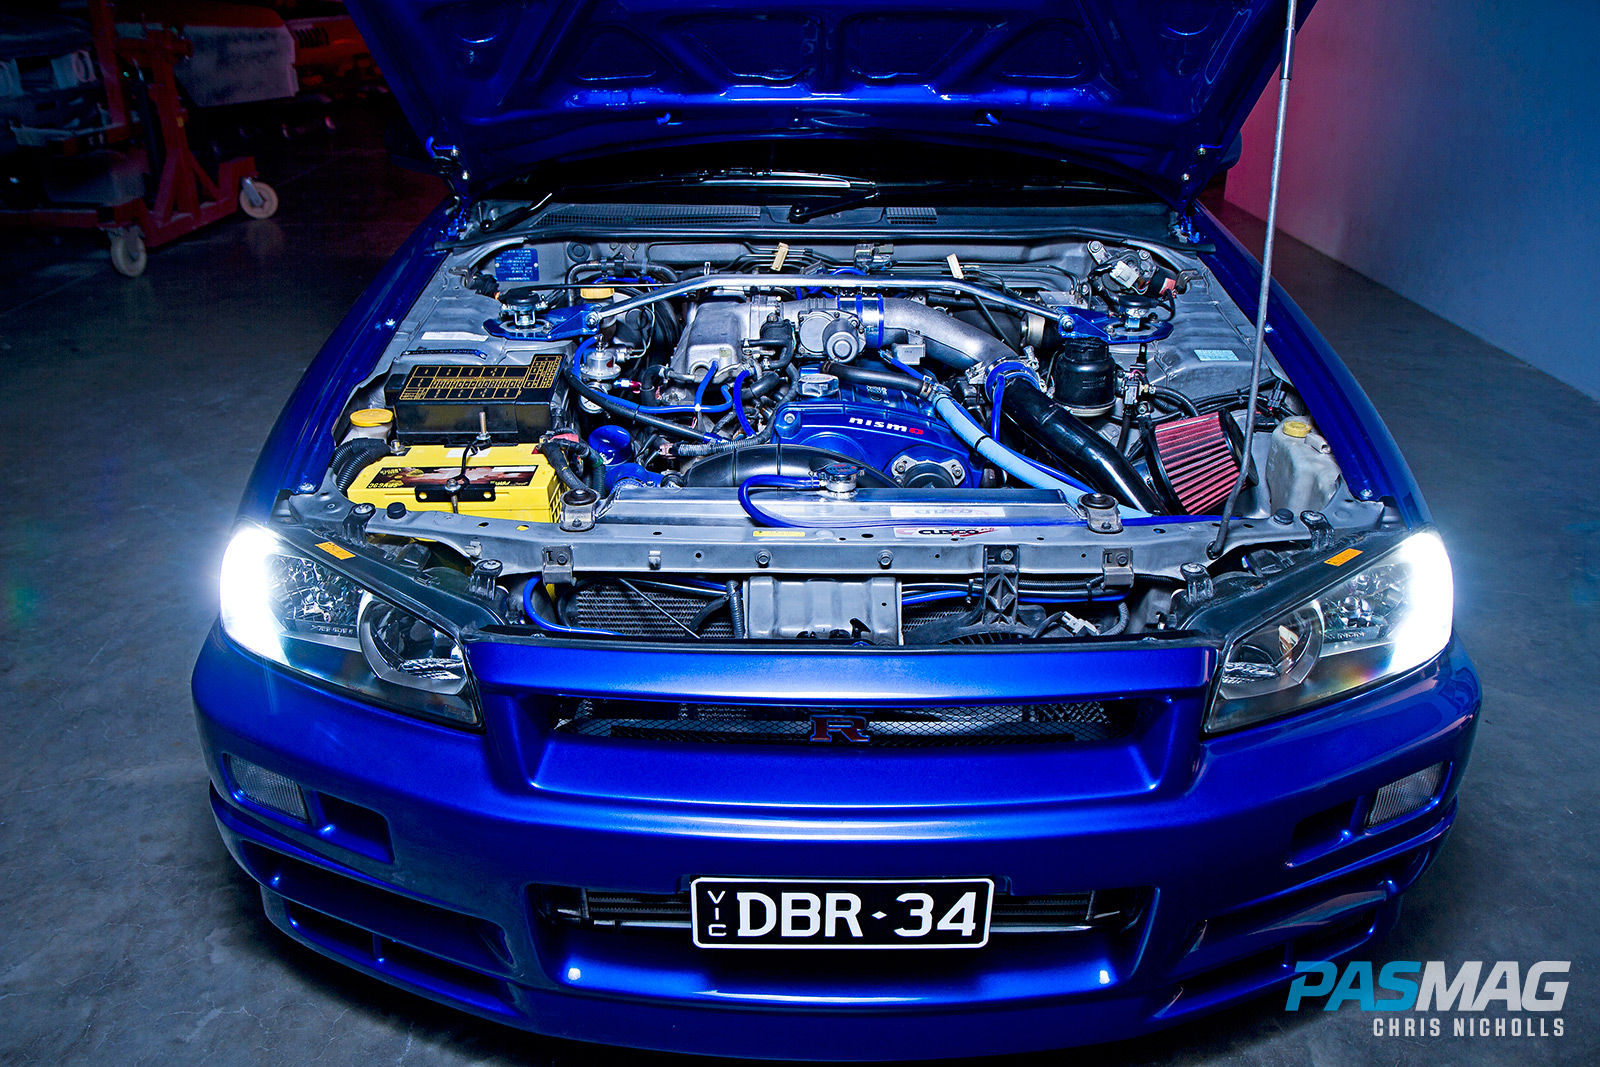 Gt Tribute Phatt Audio S 1998 Nissan Skyline Gt T Pasmag Is The Tuner S Source For Modified Car Culture Since 1999